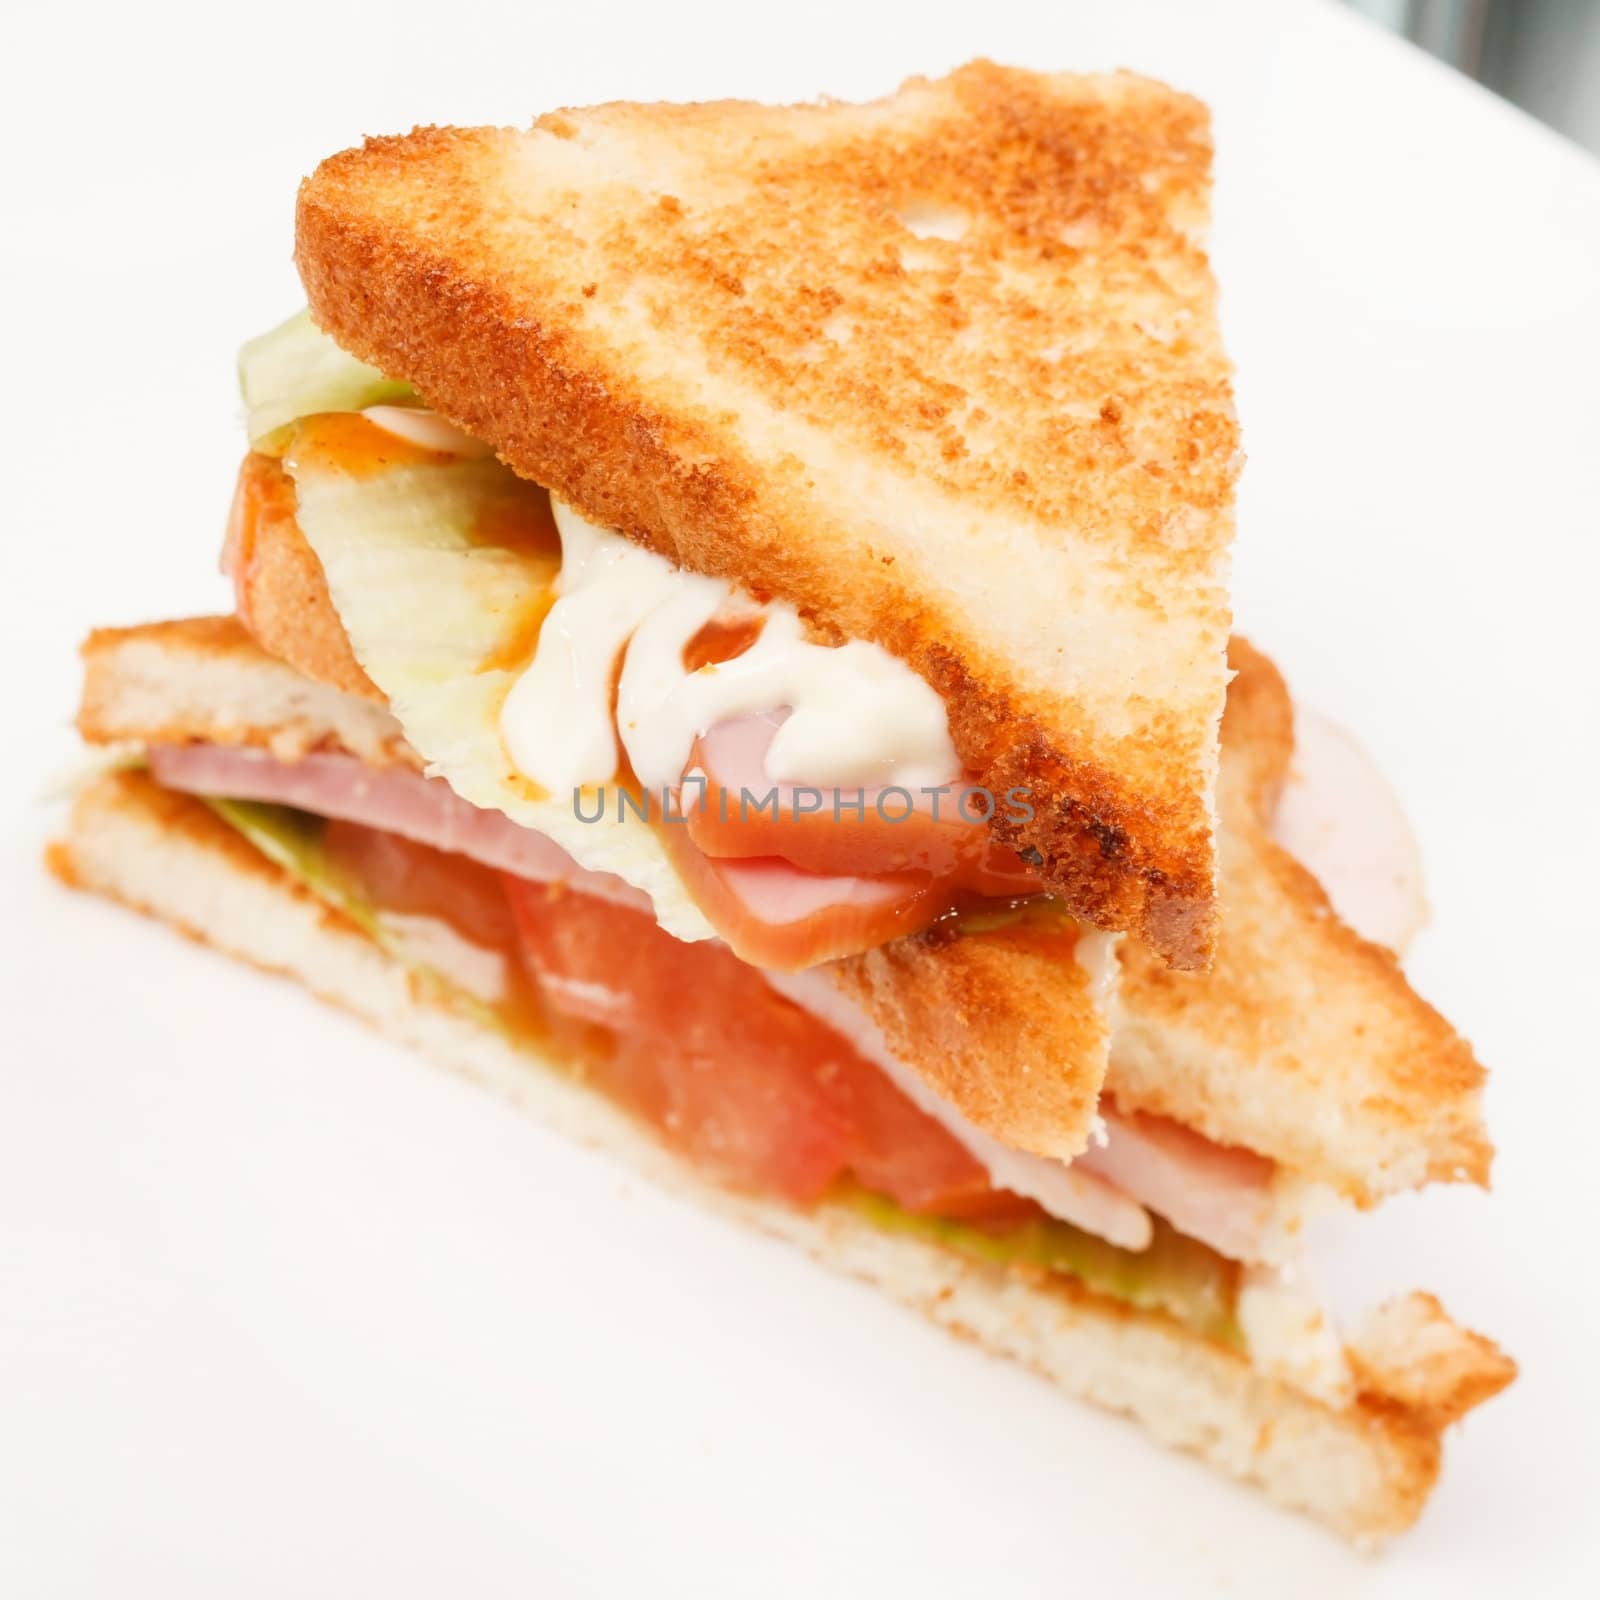 sandwiches with ham and cheese by shebeko